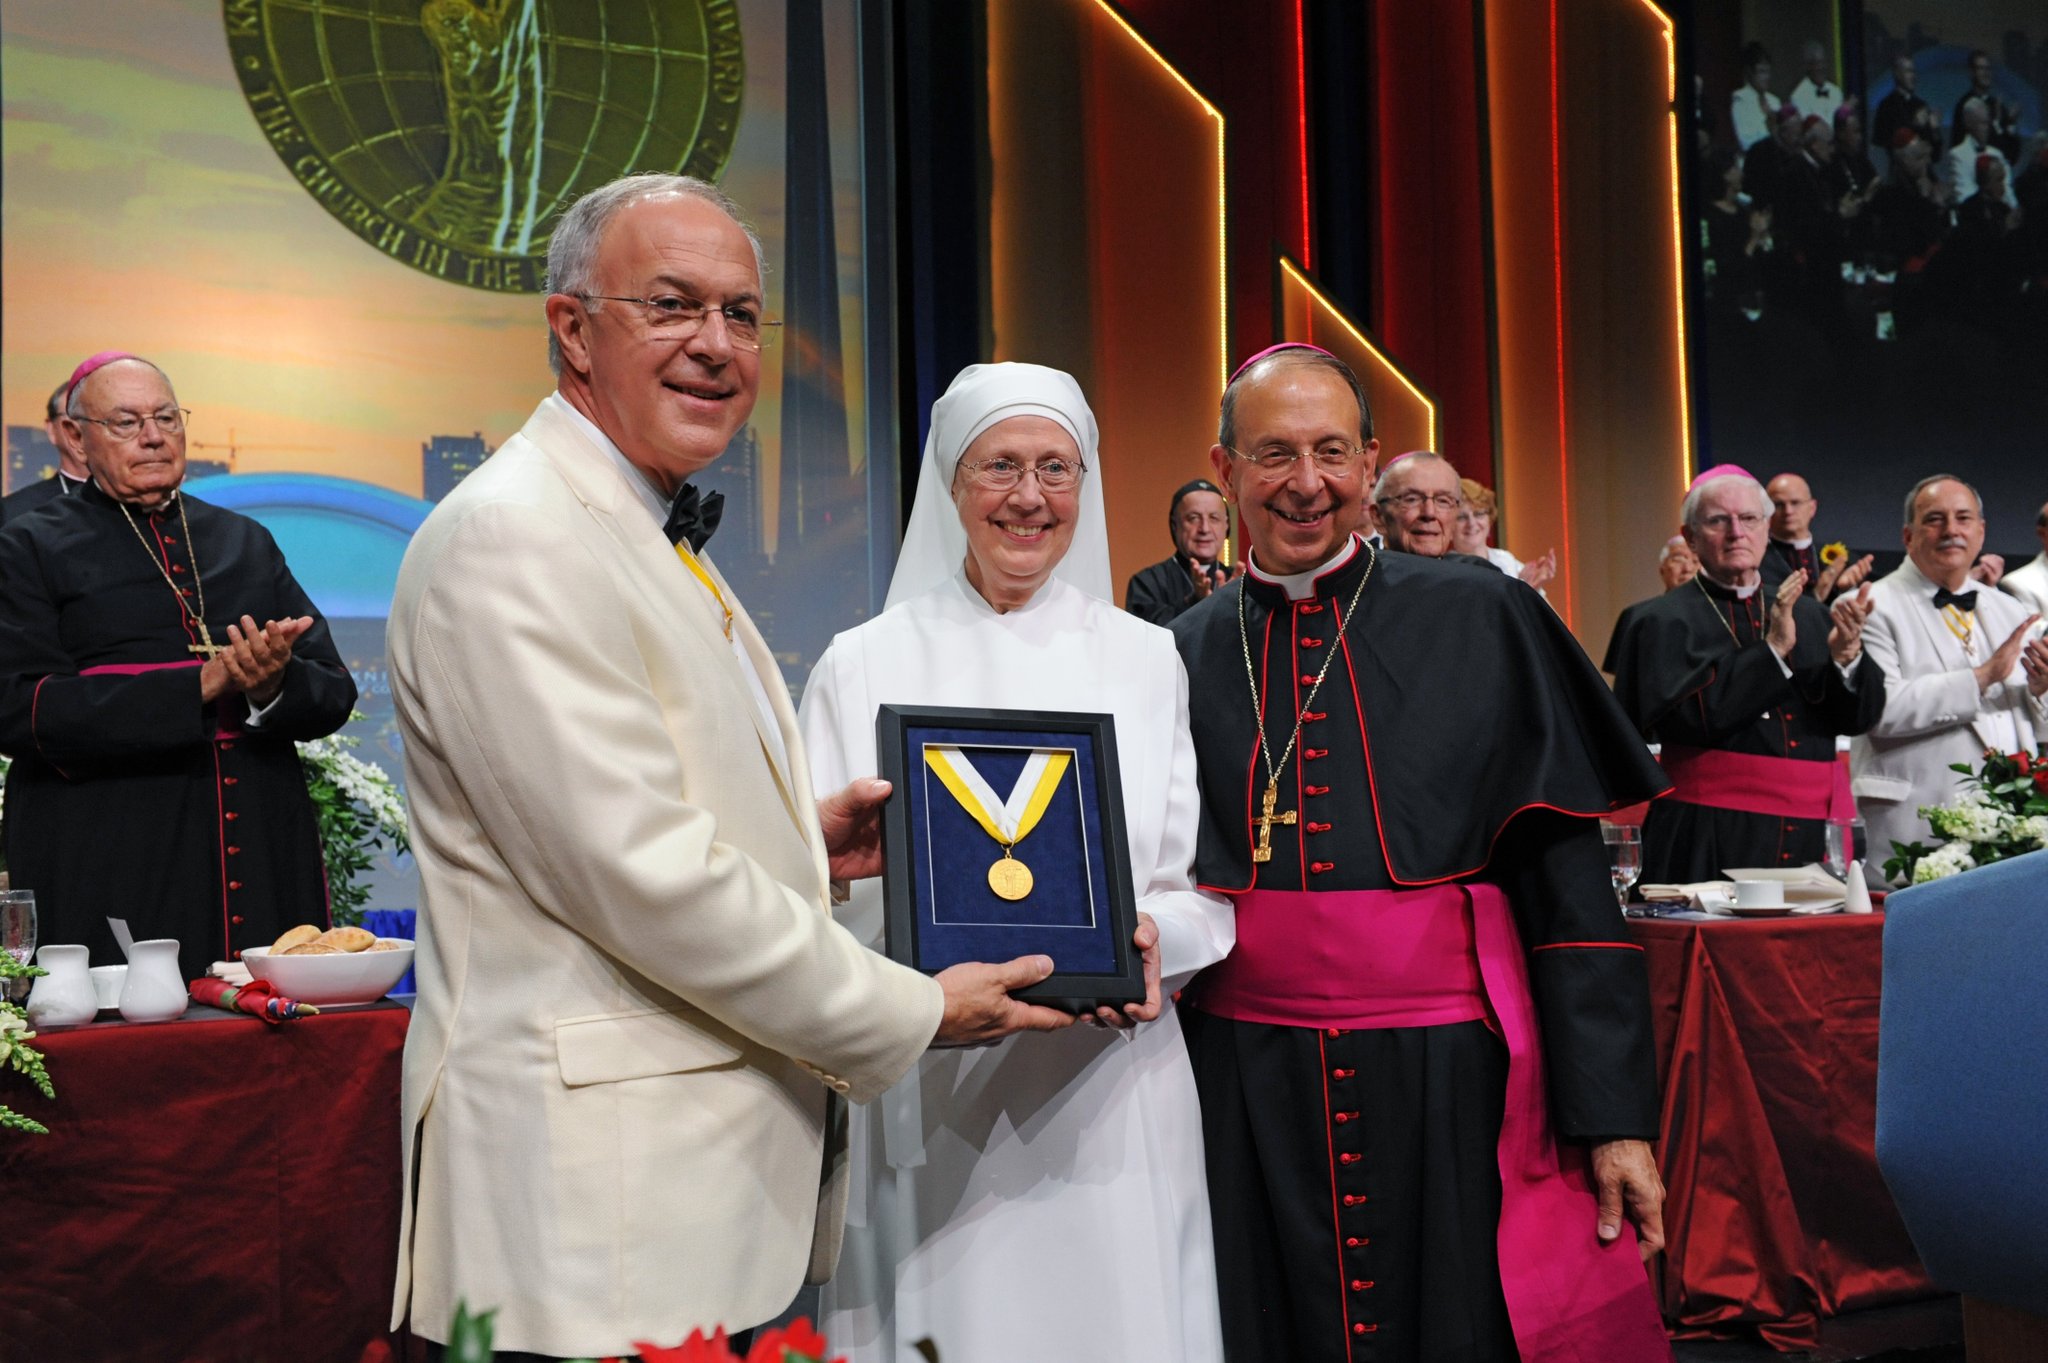 Mother Loraine Marie Maguire, superior of the Little Sisters of the Poor’s Baltimore province, receives the Gaudium et Spes Award, the Knights of Columbus’ highest honor, from Supreme Knight Carl A. Anderson and Supreme Chaplain Archbishop William E. Lori of Baltimore during the States Dinner at the Knights’ 134th annual convention. (Photo courtesy of the Knights of Columbus)